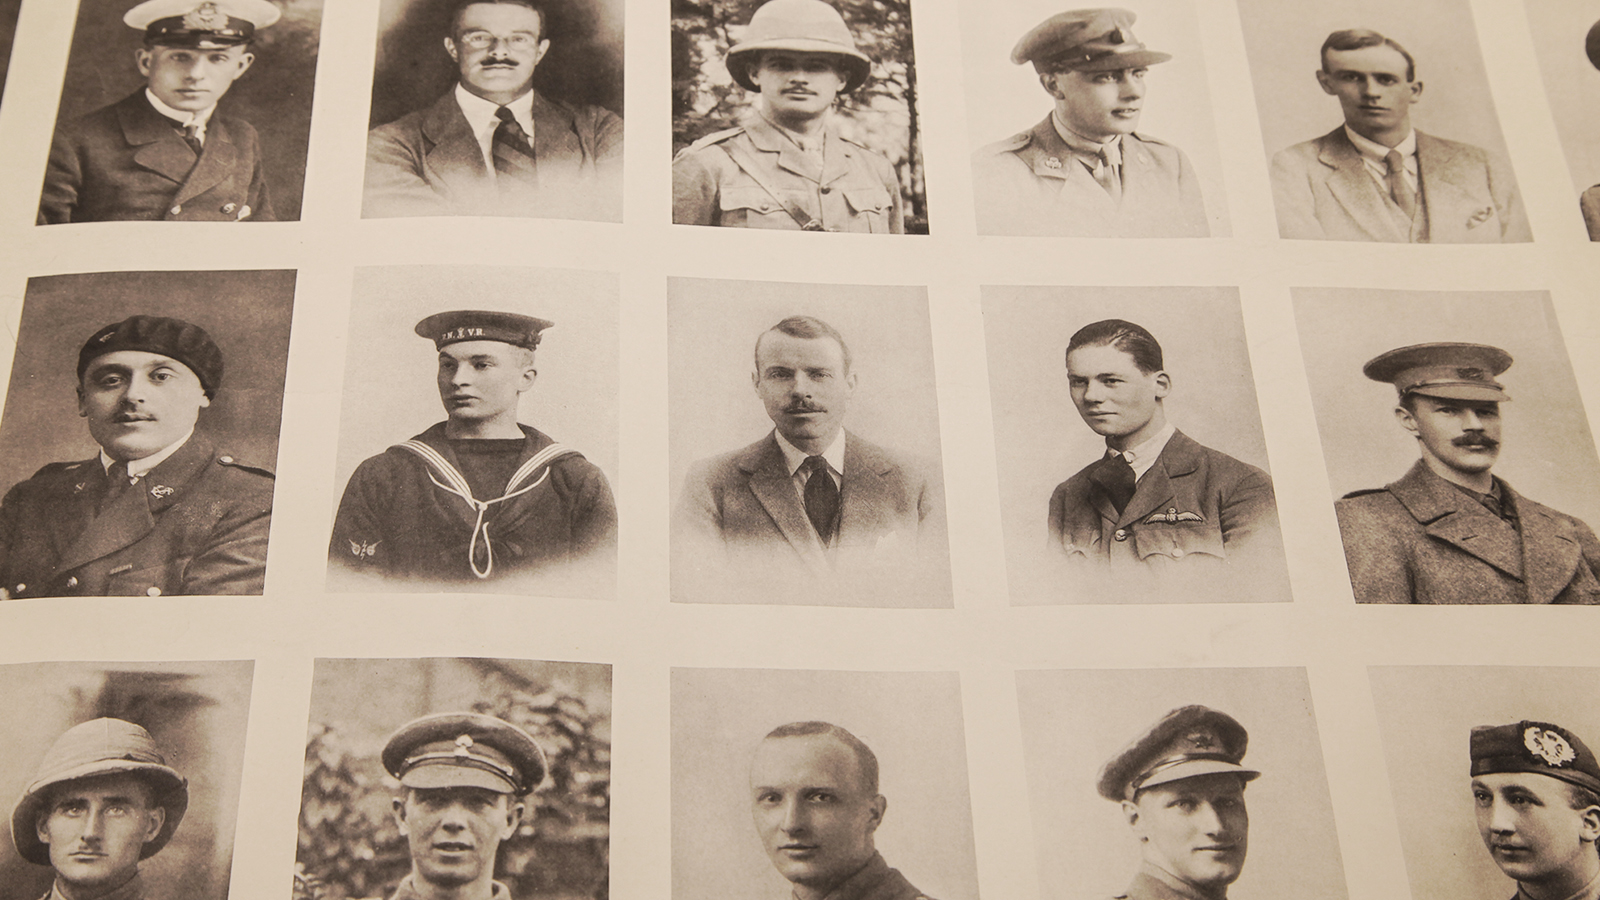 Photographs of some of the 169 HSBC employees who joined the British forces during the First World War